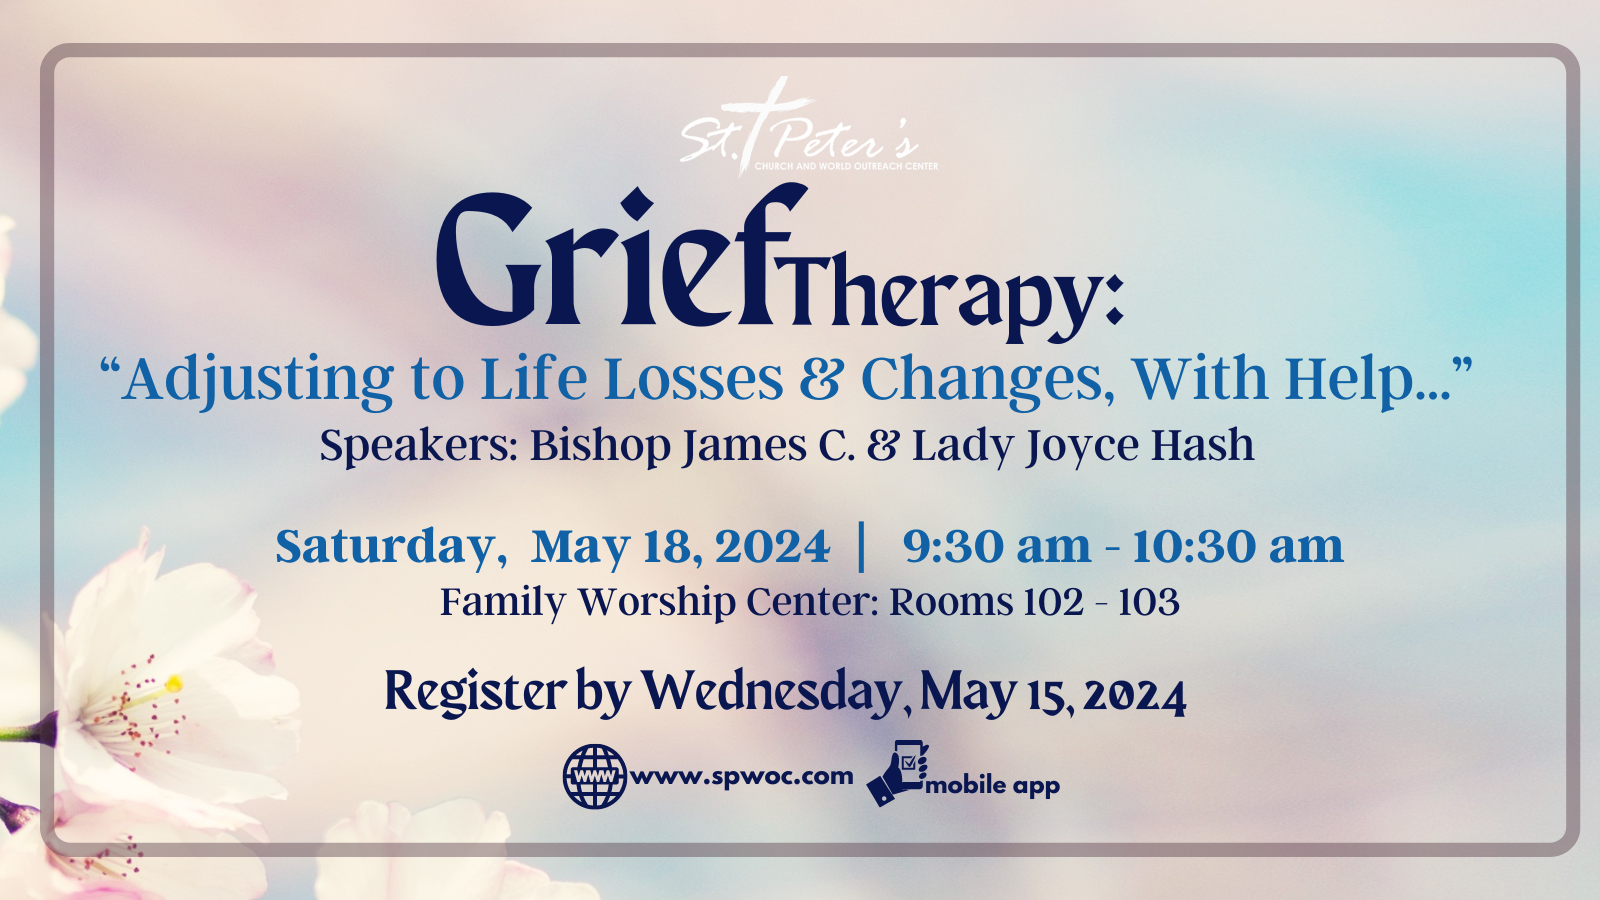 PPT - Grief Therapy  (4).png